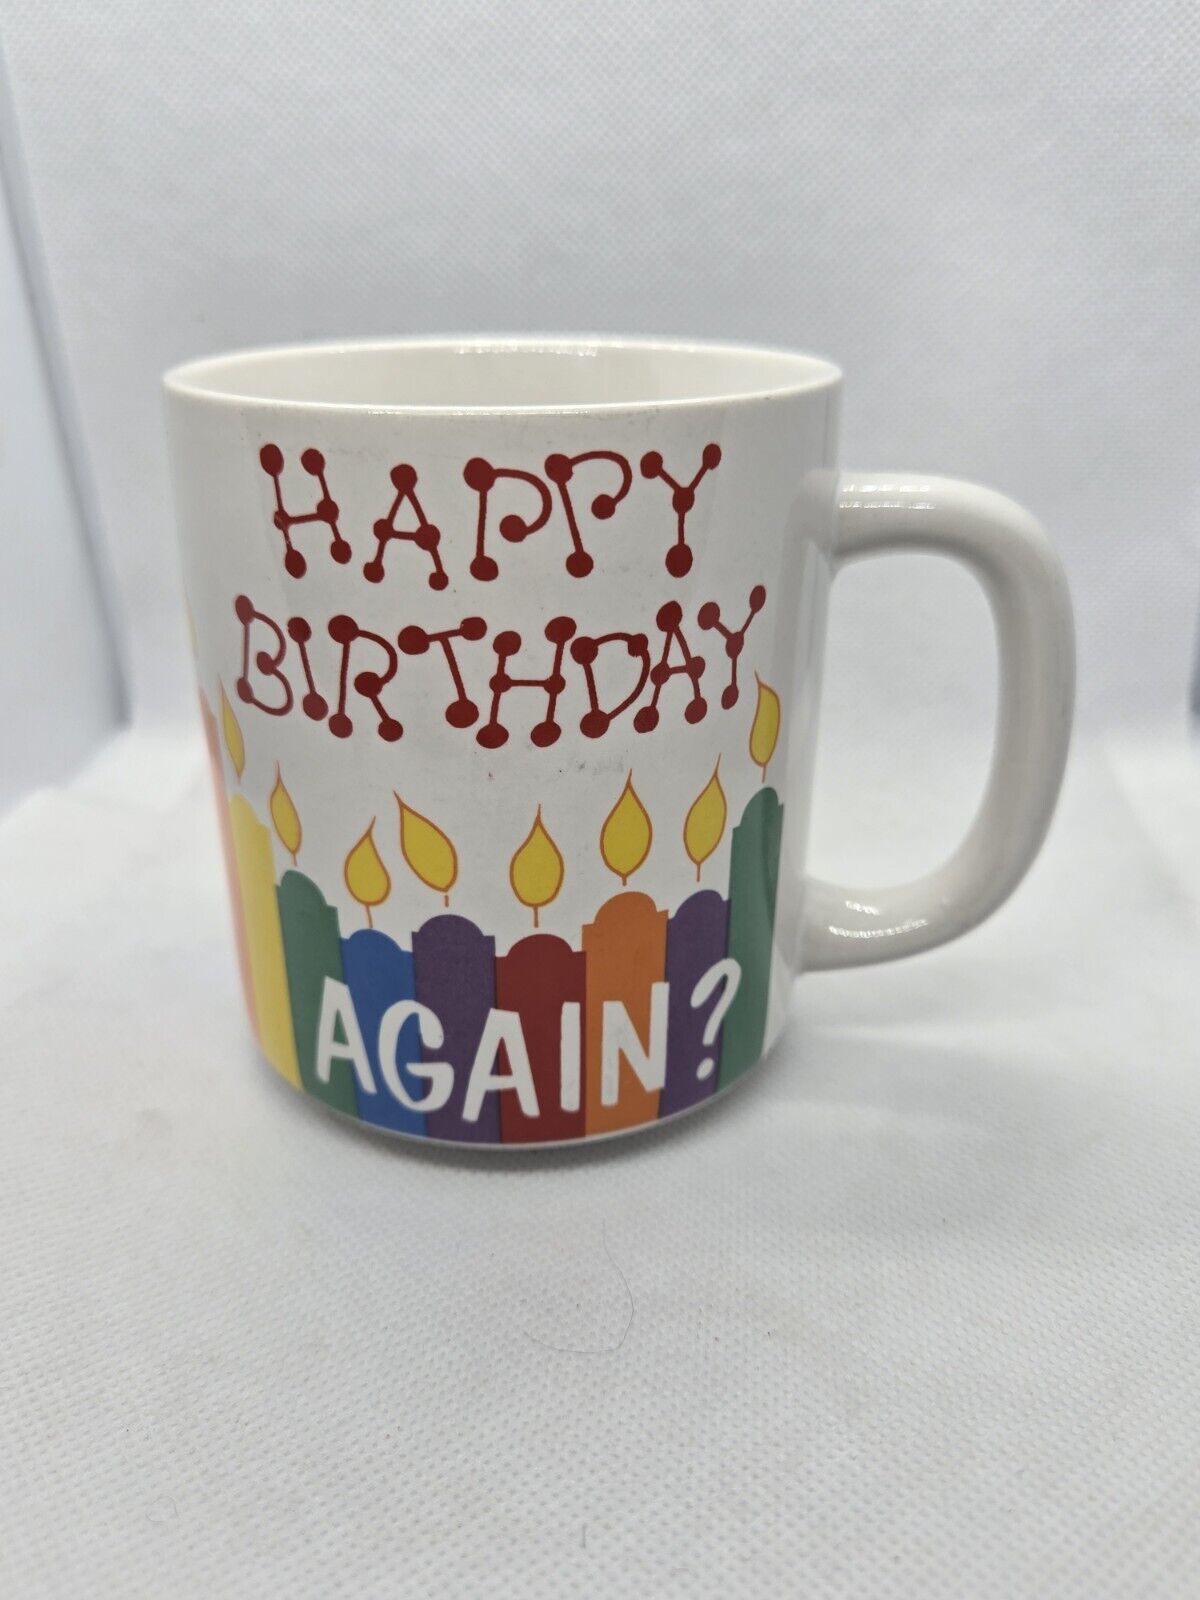 Norcrest Happy 39th Birthday Again Vintage Mug Cup Defects In Pictures